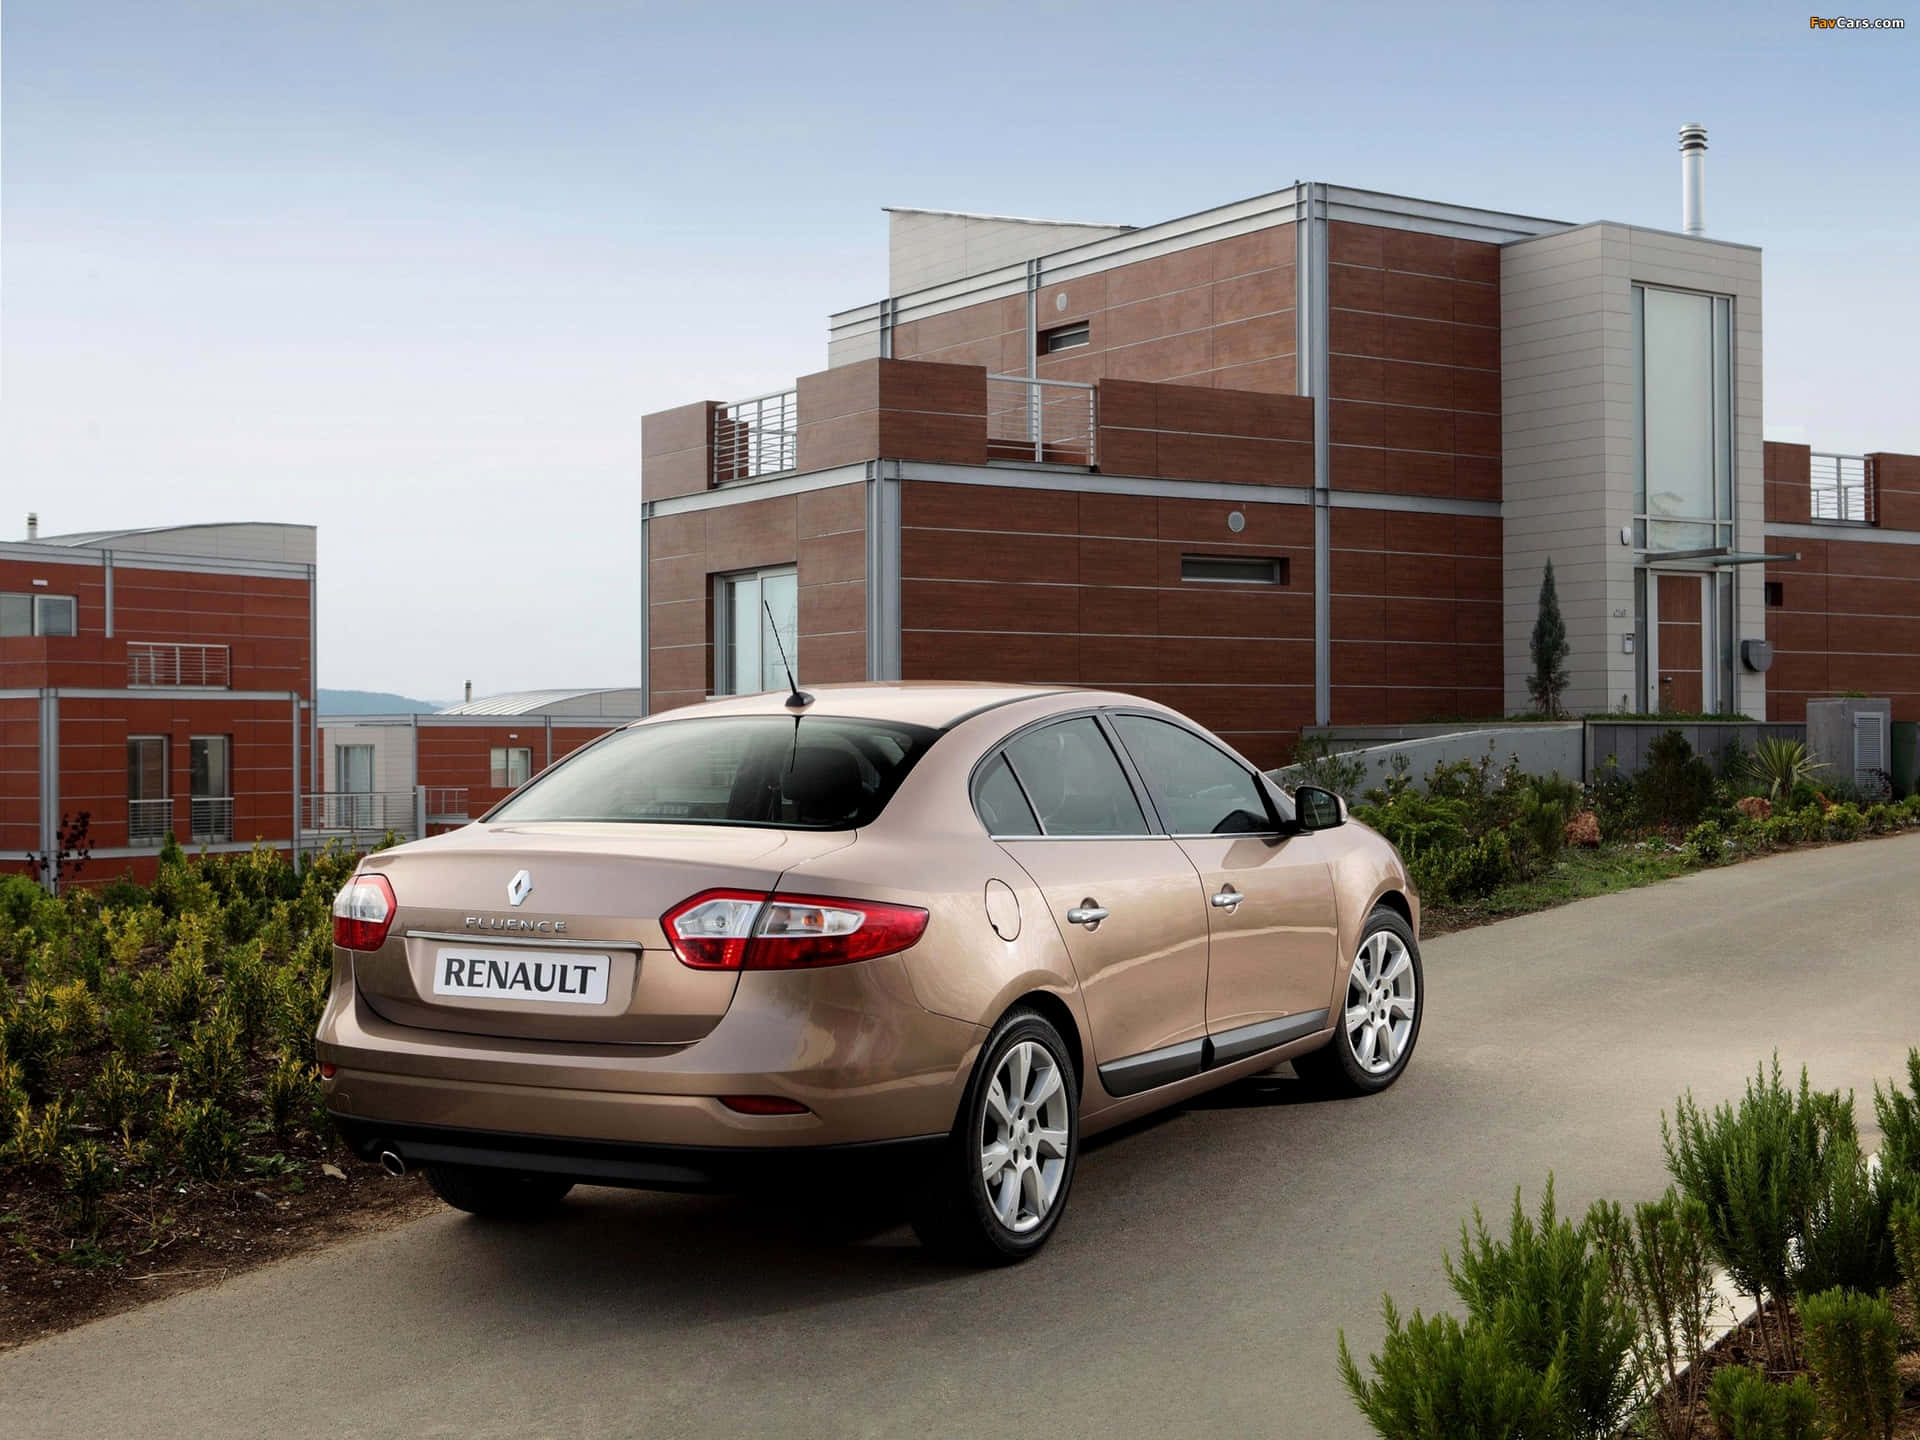 Sleek and Stylish Renault Fluence on the Road Wallpaper